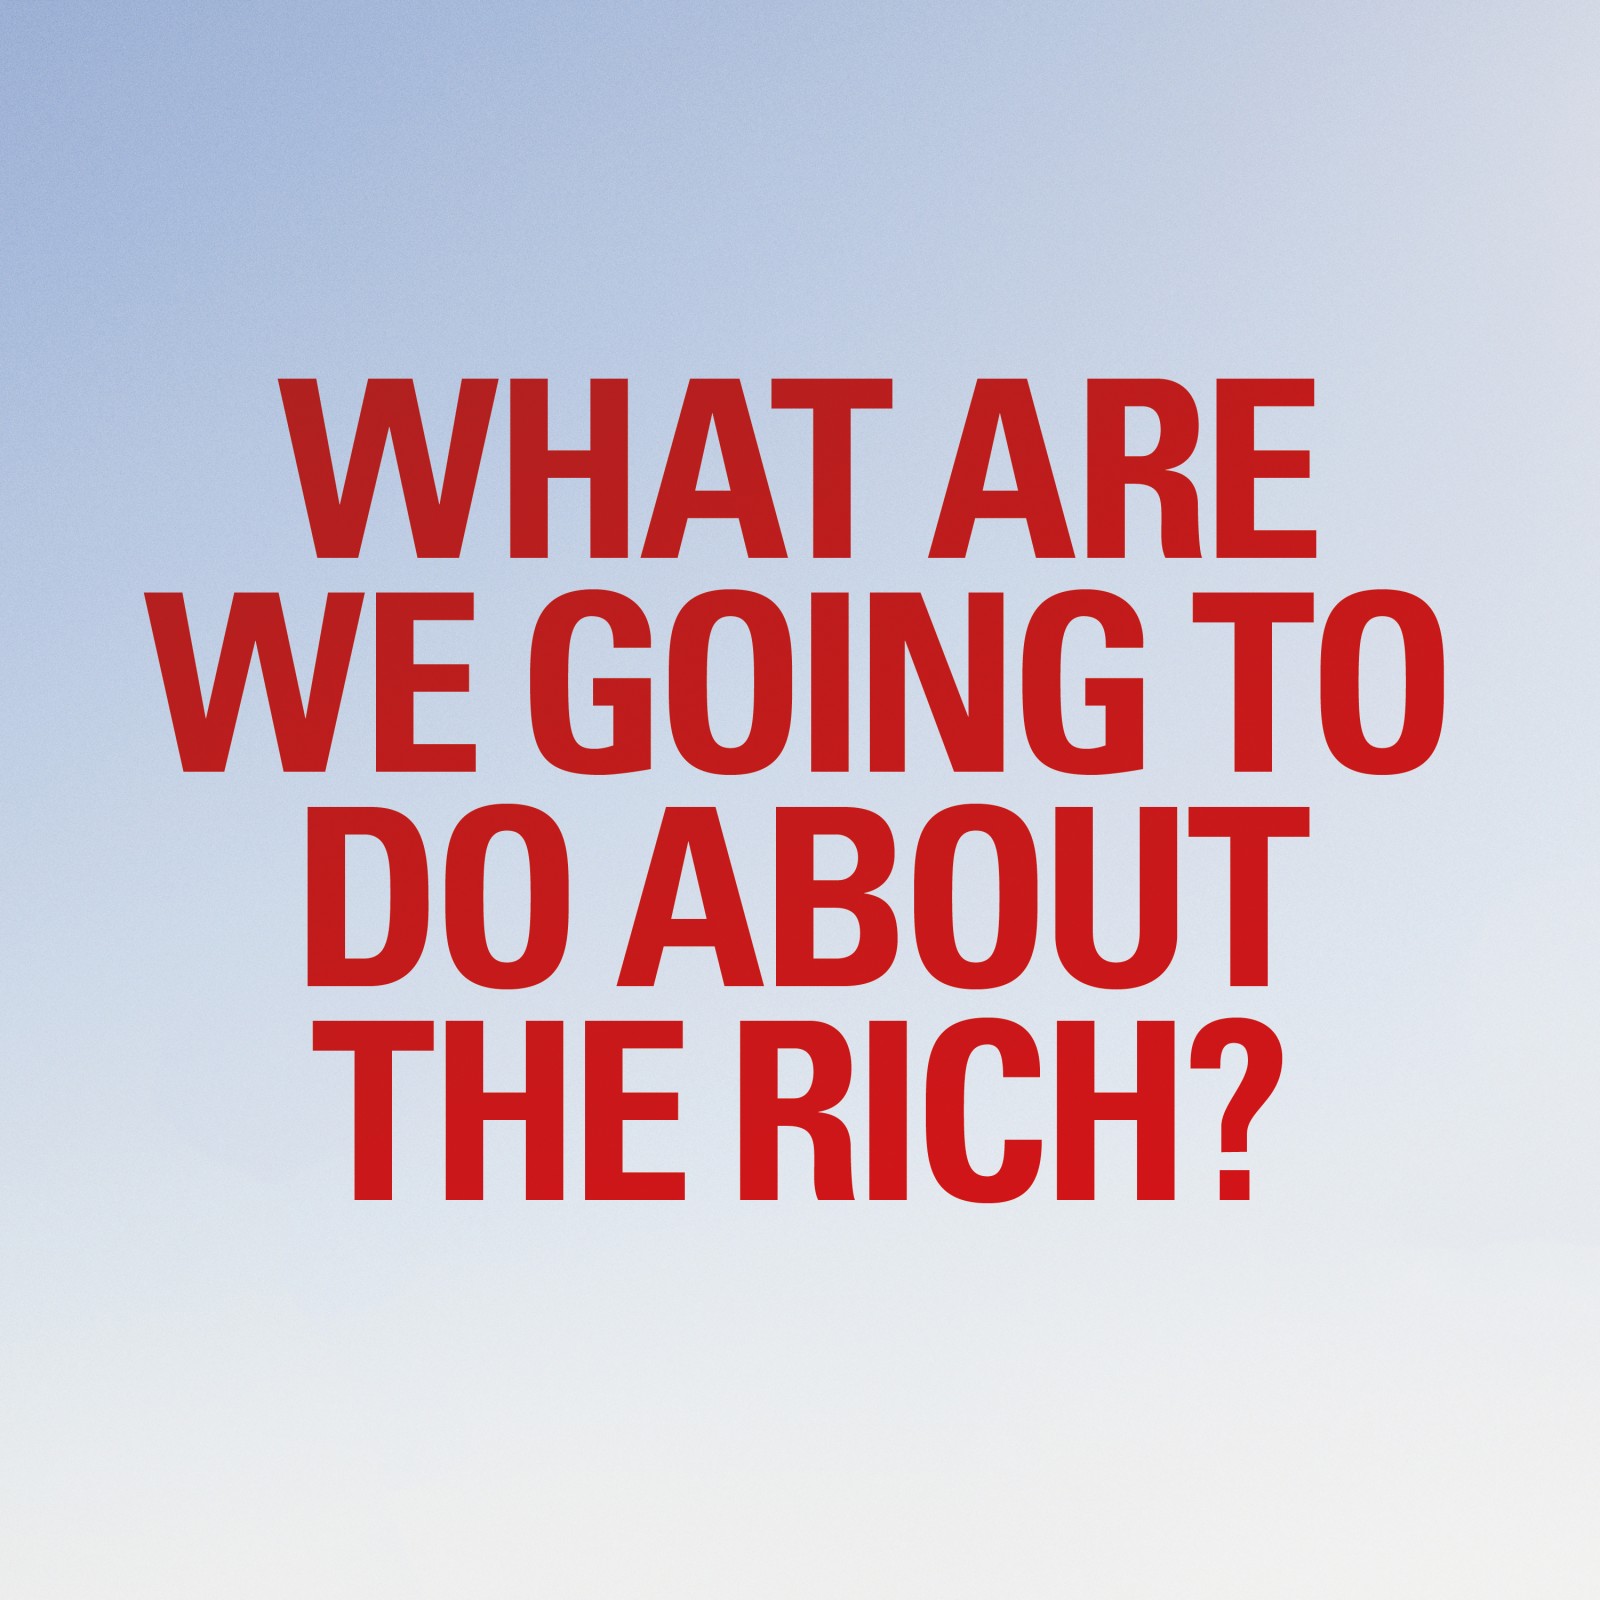 Pet Shop Boys — What are we going to do about the rich? cover artwork